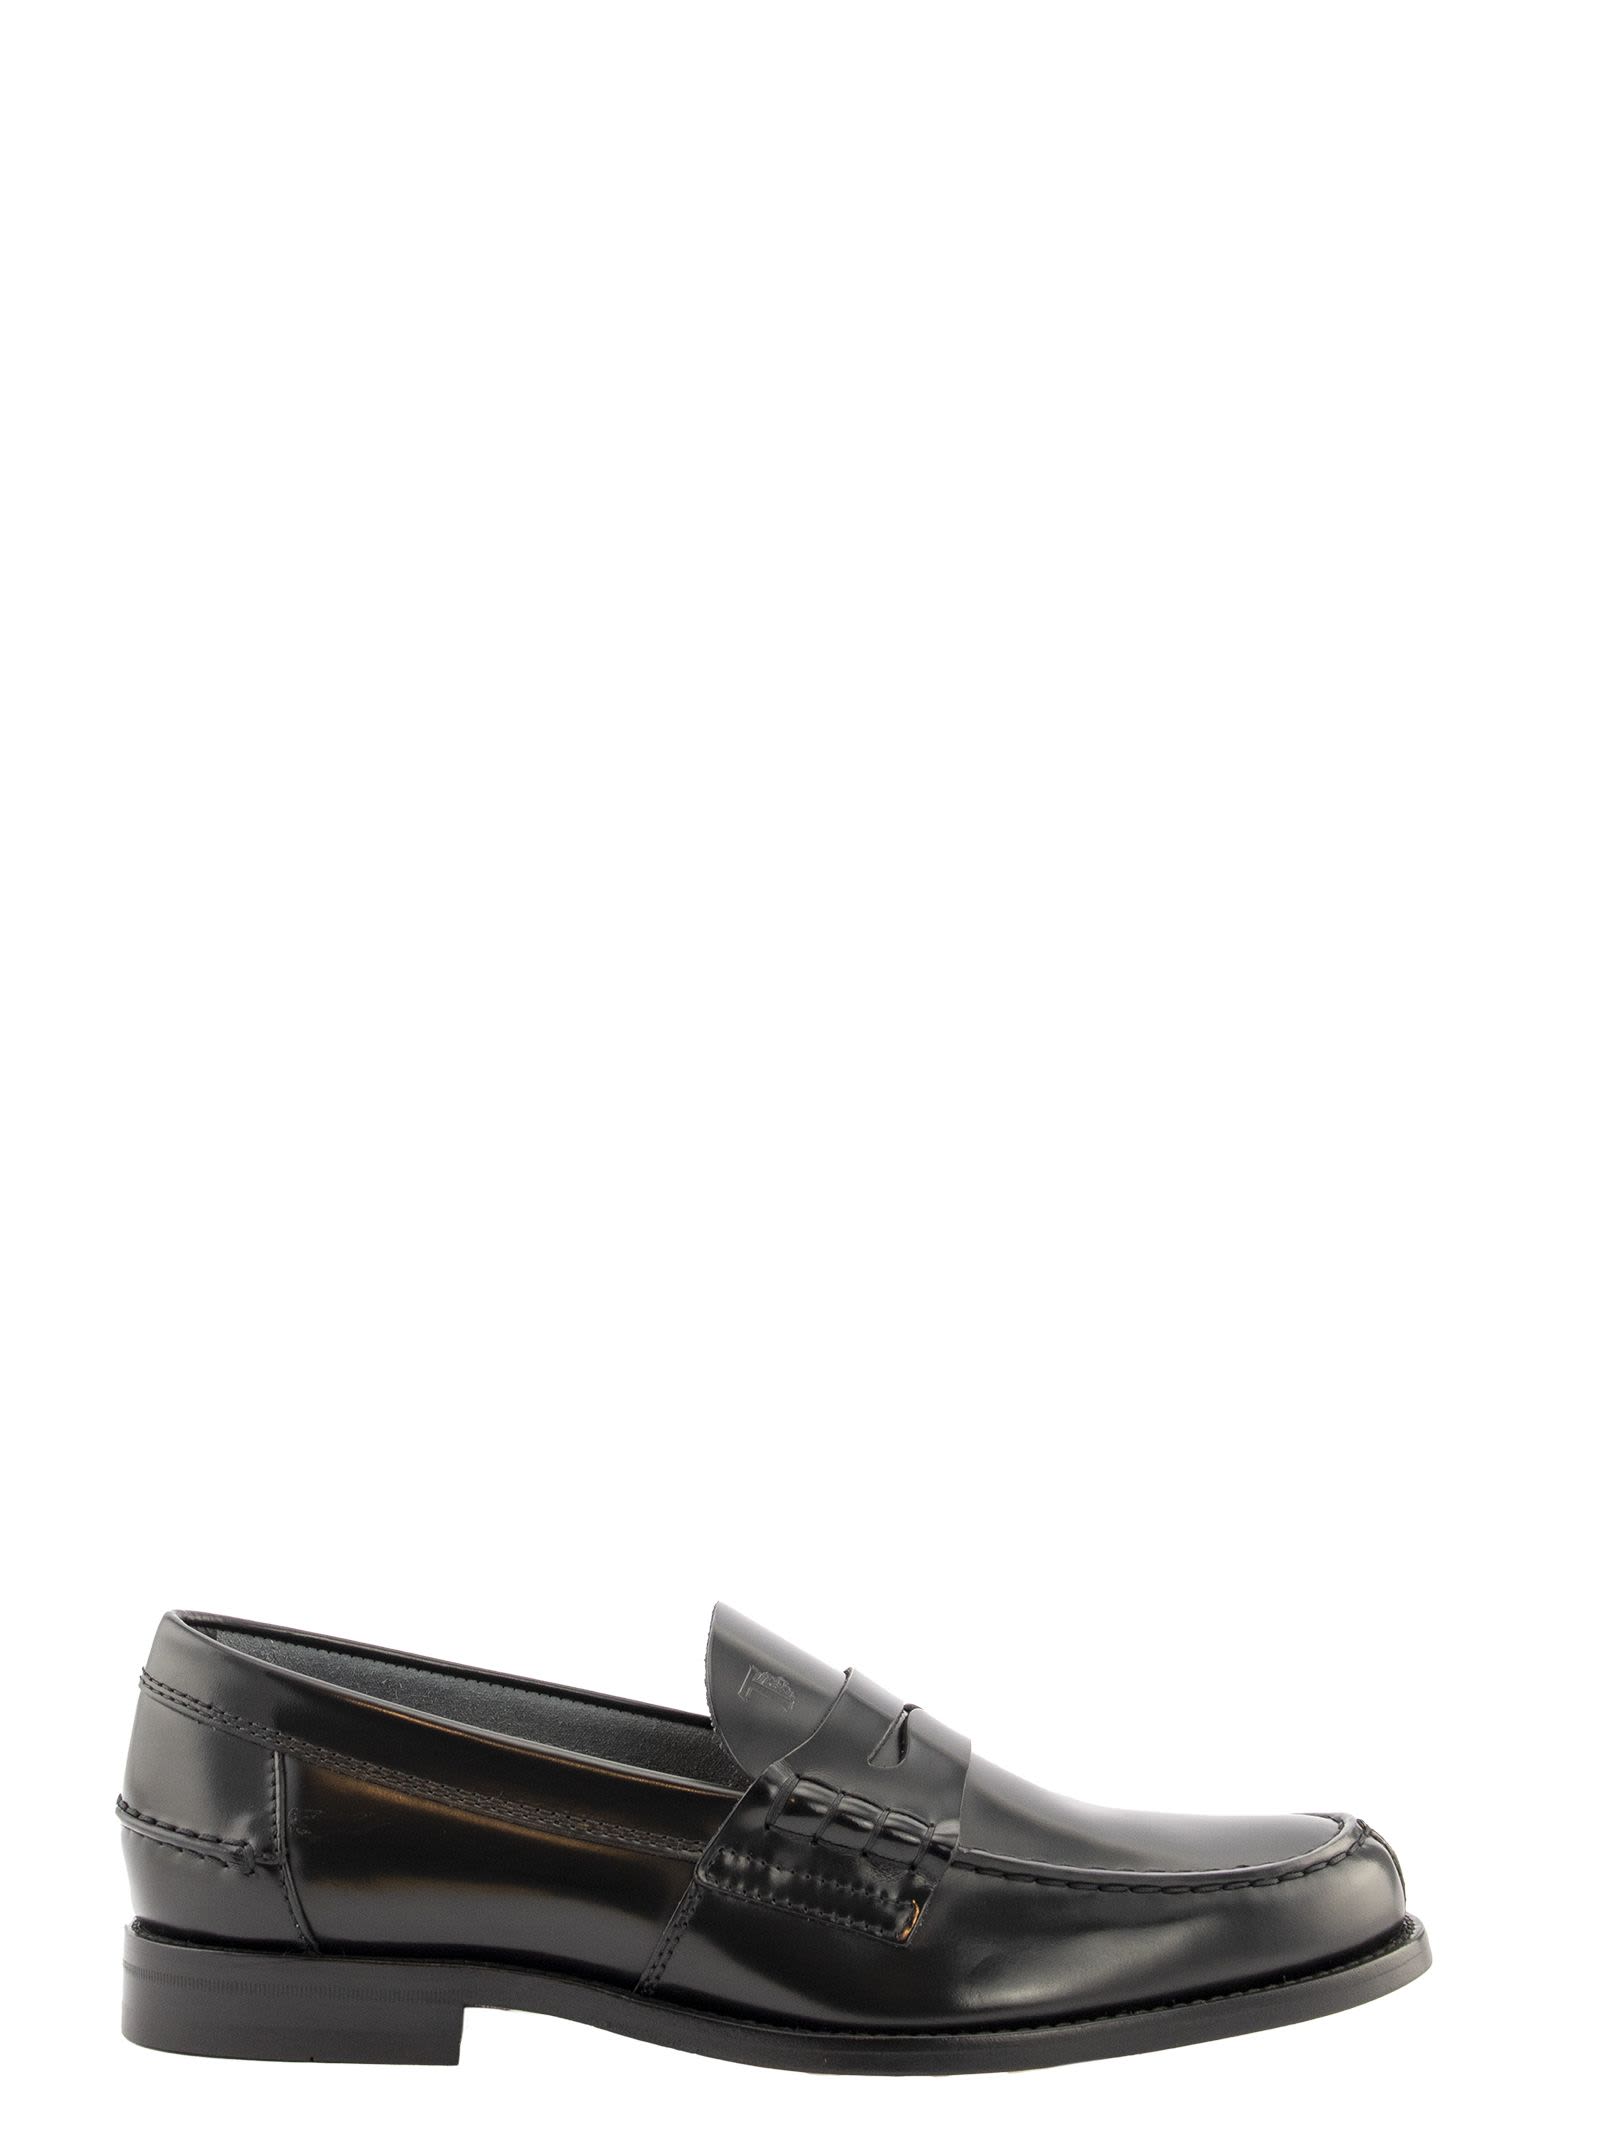 tods loafers leather